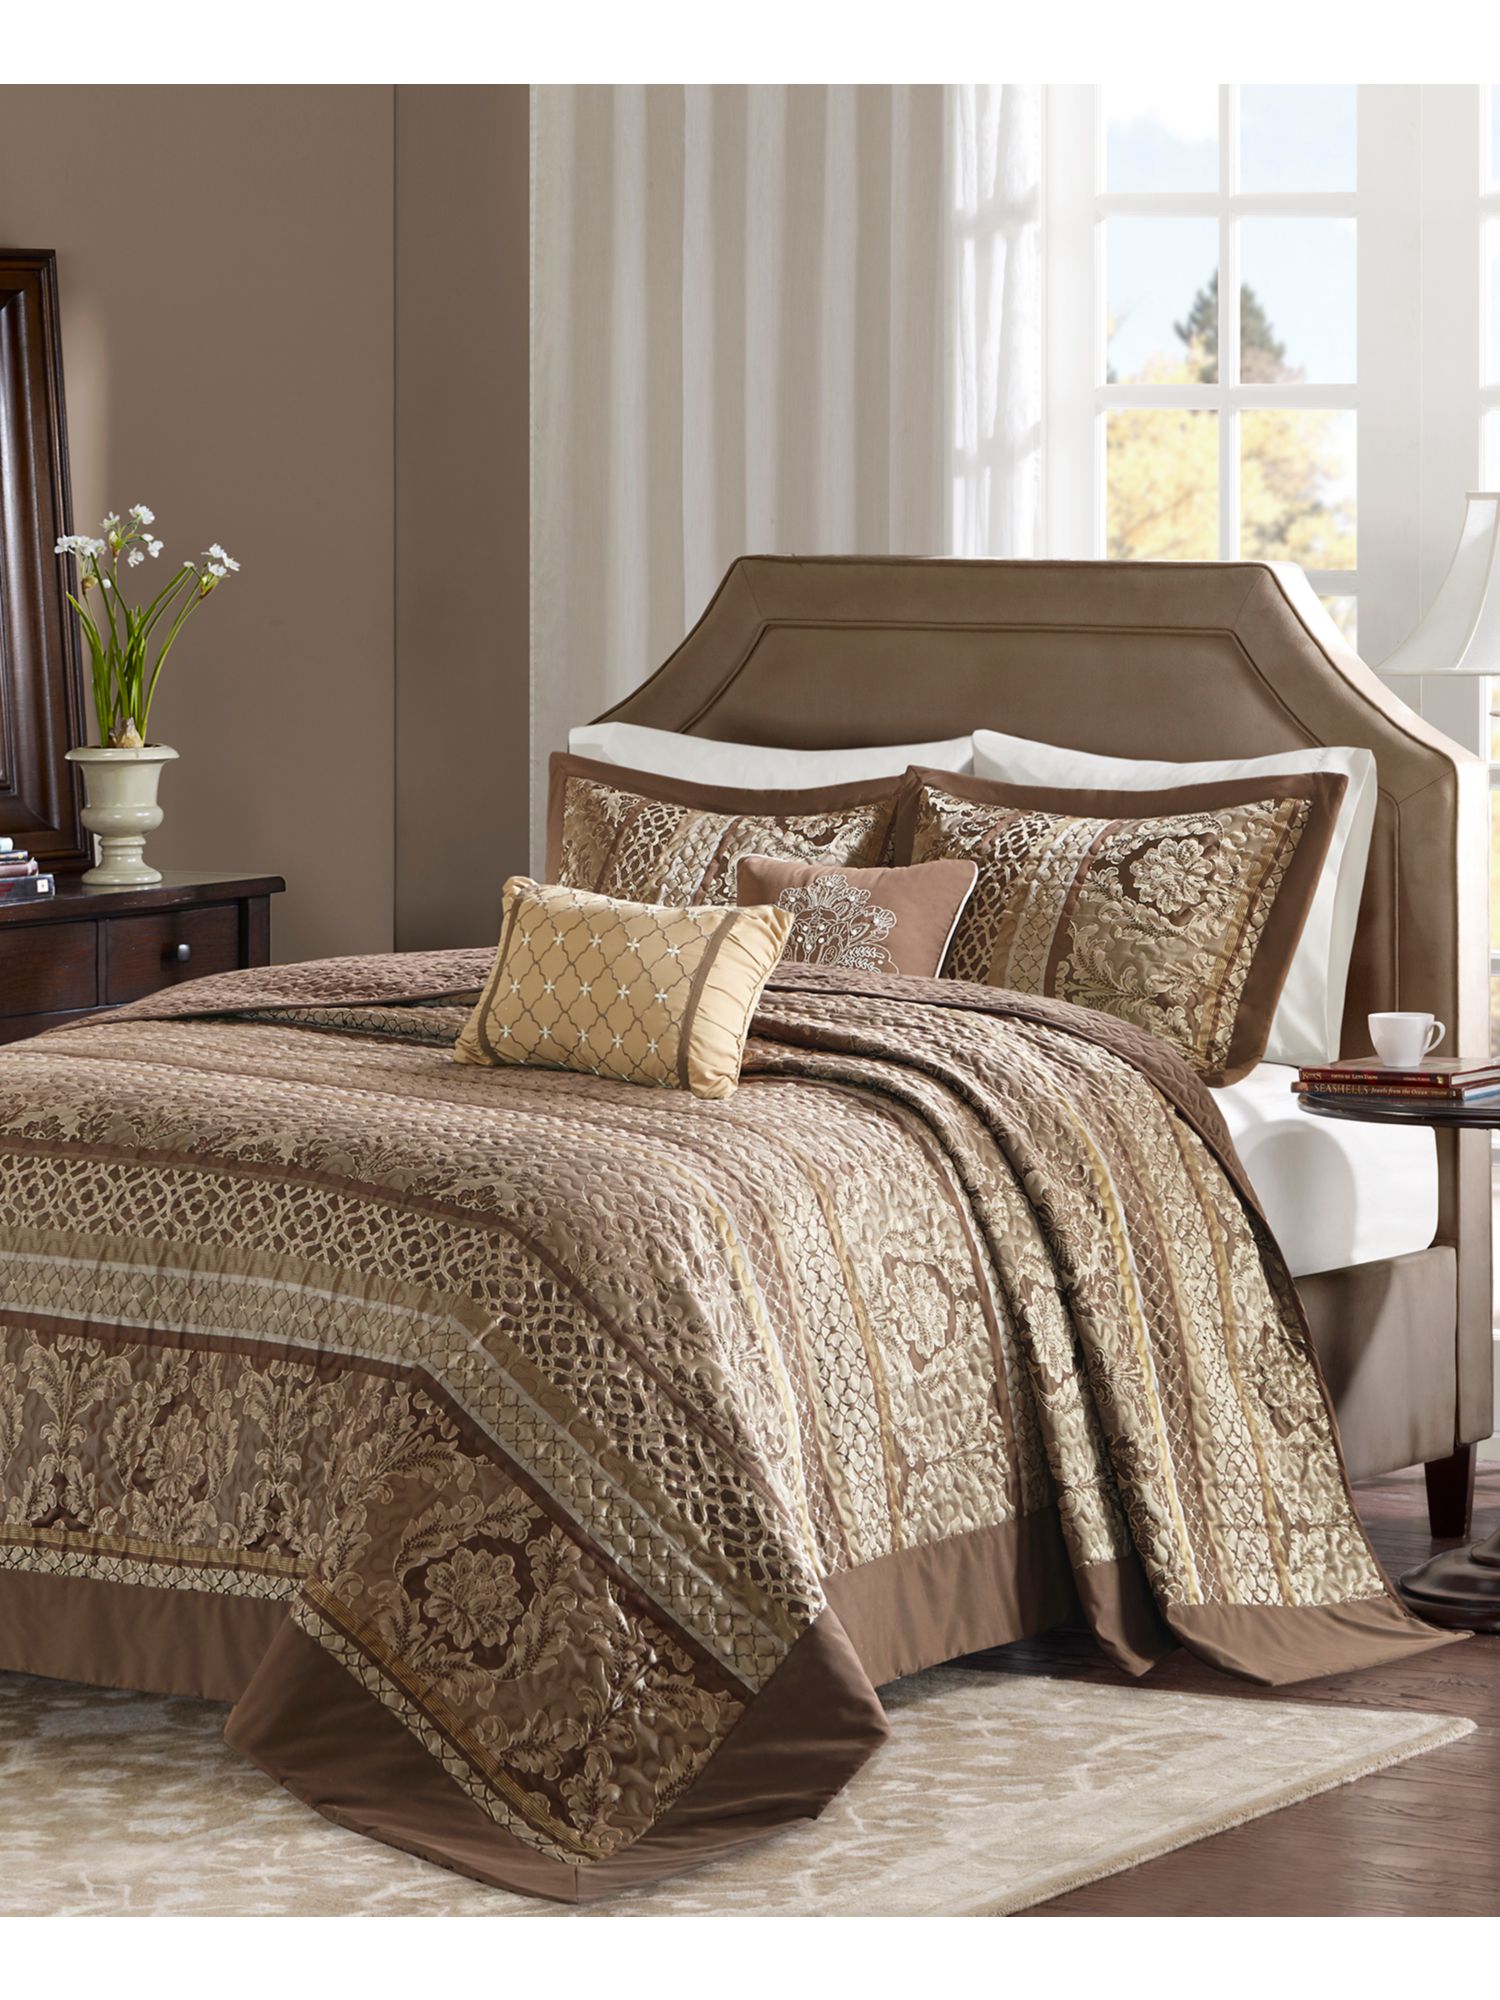 MADISON PARK Bellagio Brown Patterned Queen Bedspread Set